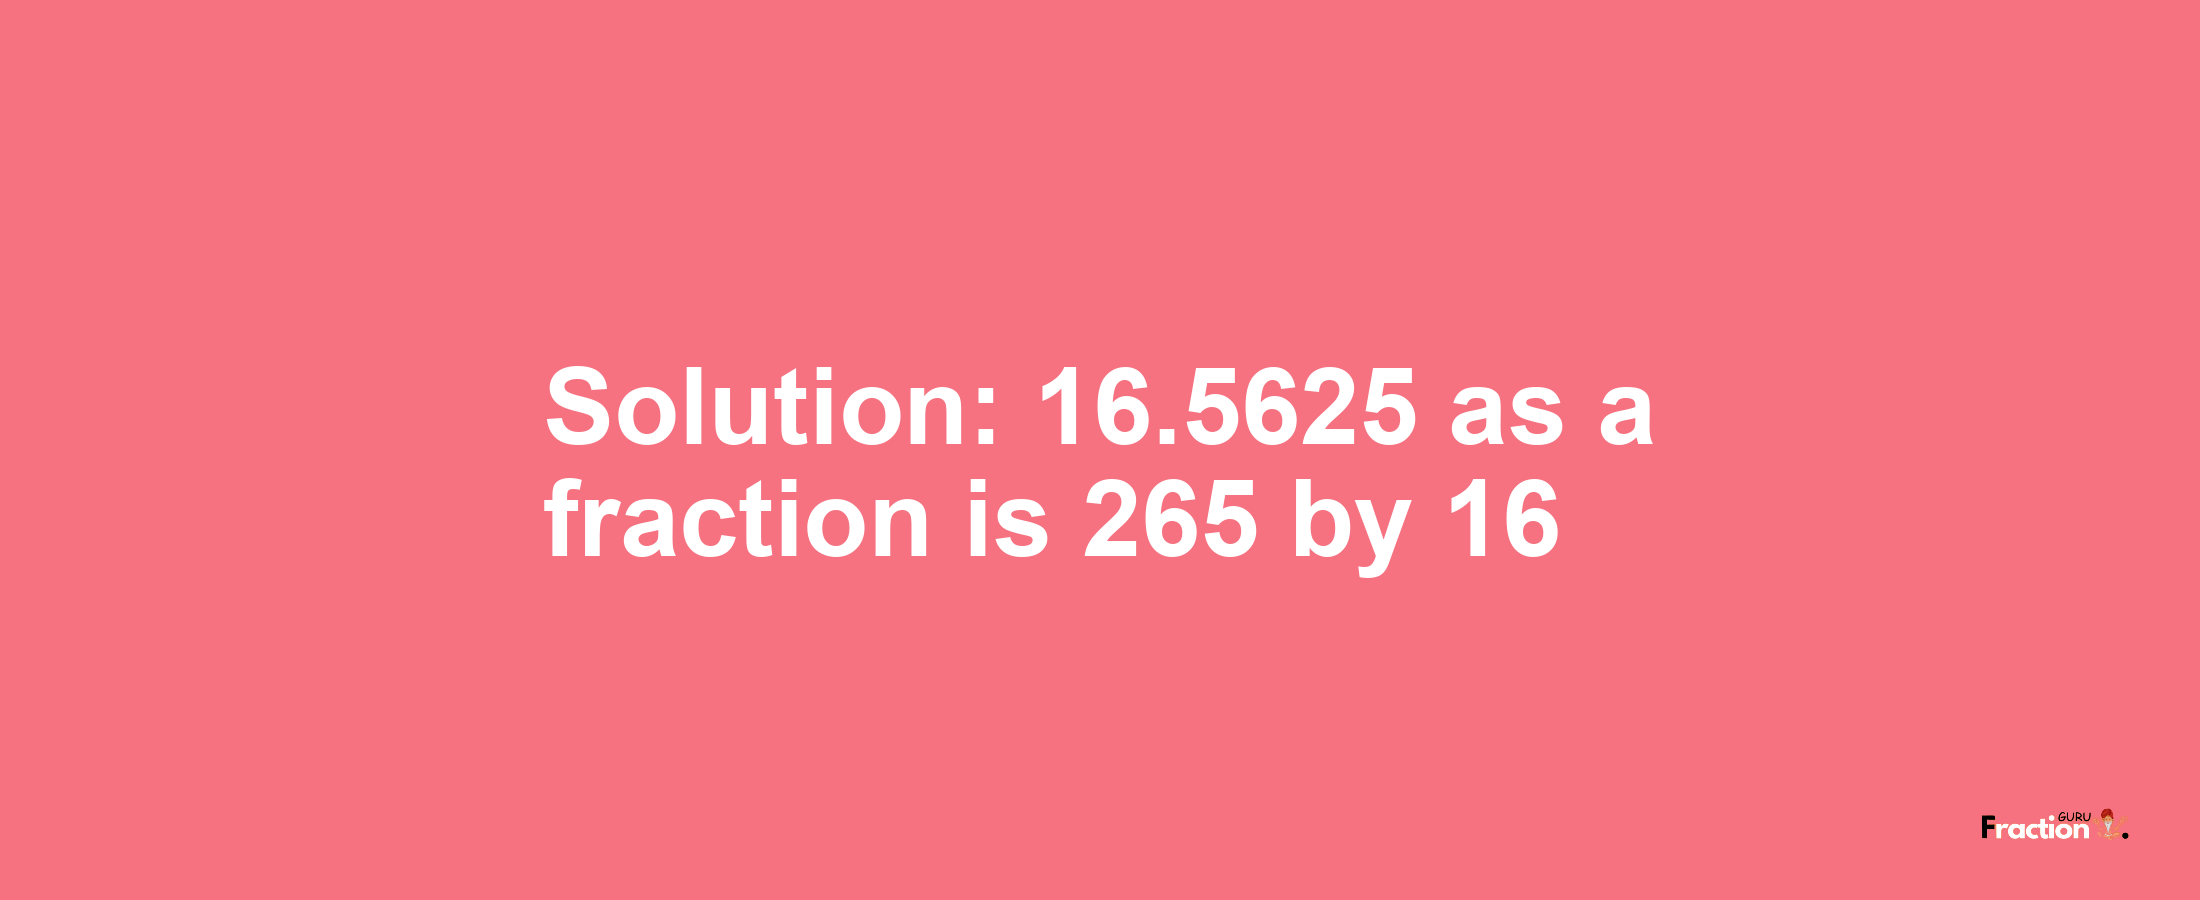 Solution:16.5625 as a fraction is 265/16